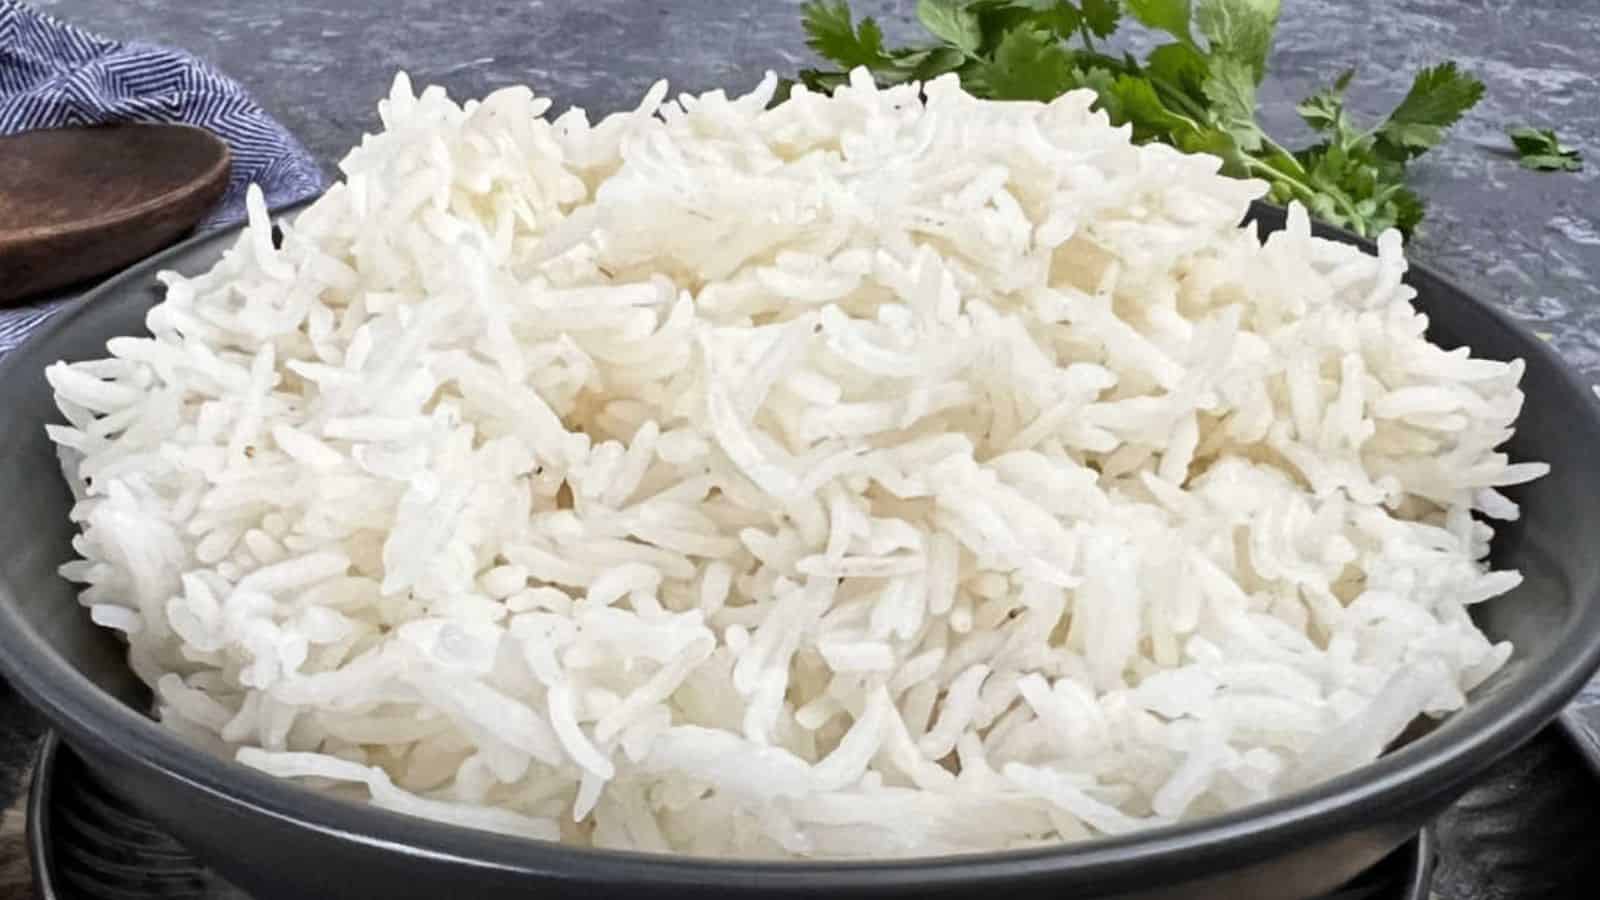 A bowl of cooked Basmati Rice on a gray surface, garnished with parsley, with a wooden spoon nearby.